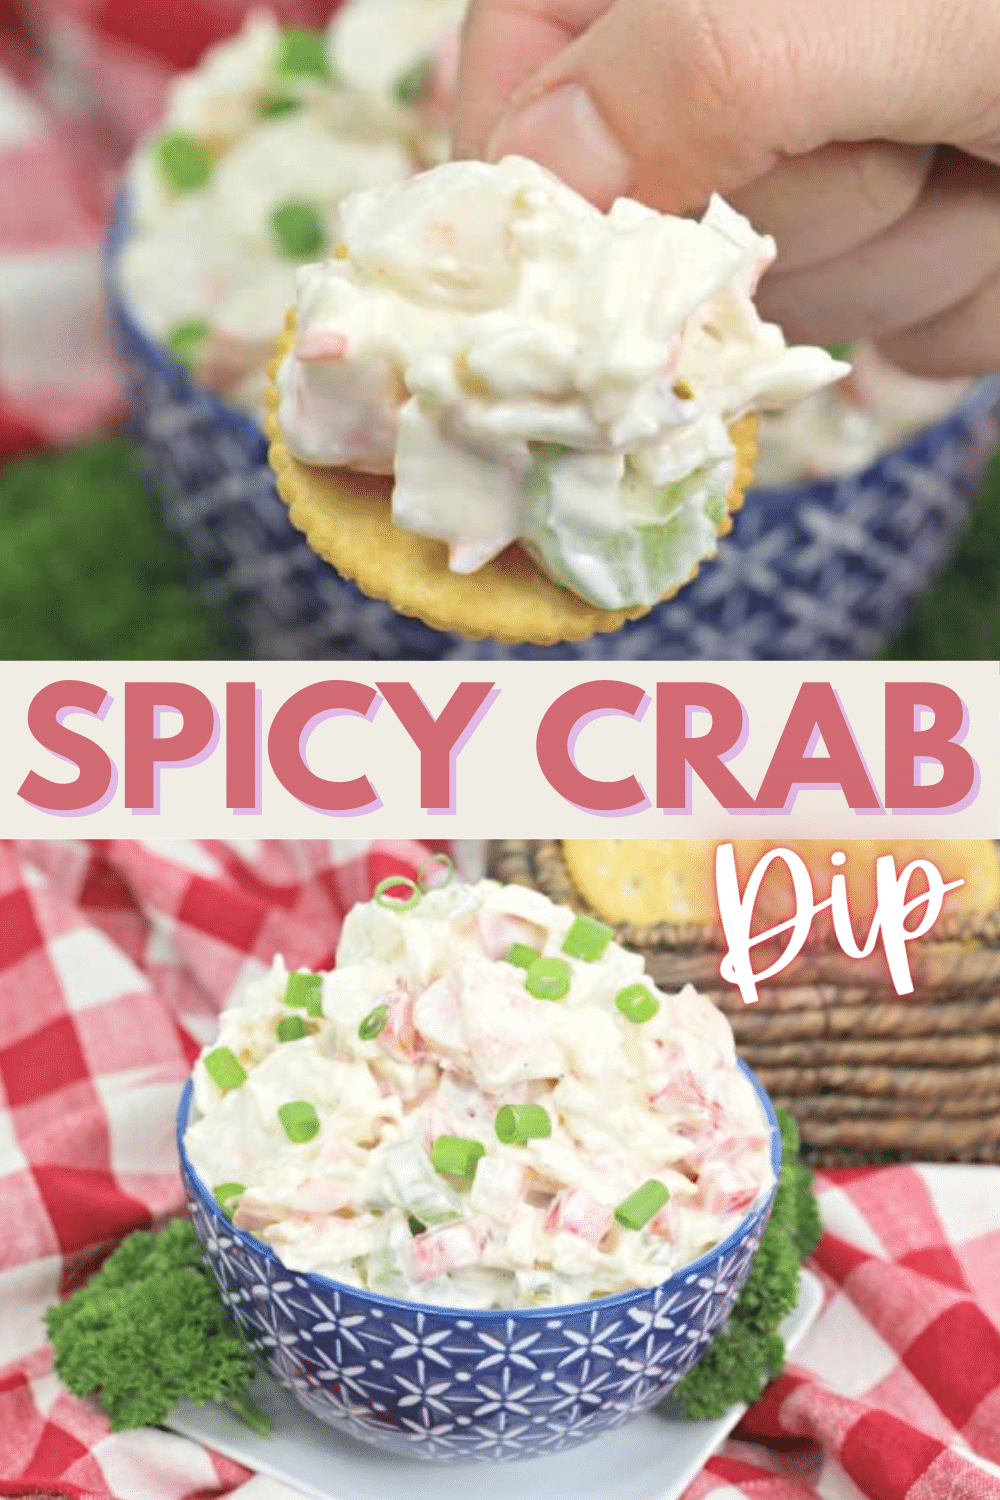 Spicy Crab Dip is the perfect party food. Crab meat, bell peppers, cream cheese and more make this a decadent appetizer for any party. #crab #appetizers #dip via @wondermomwannab